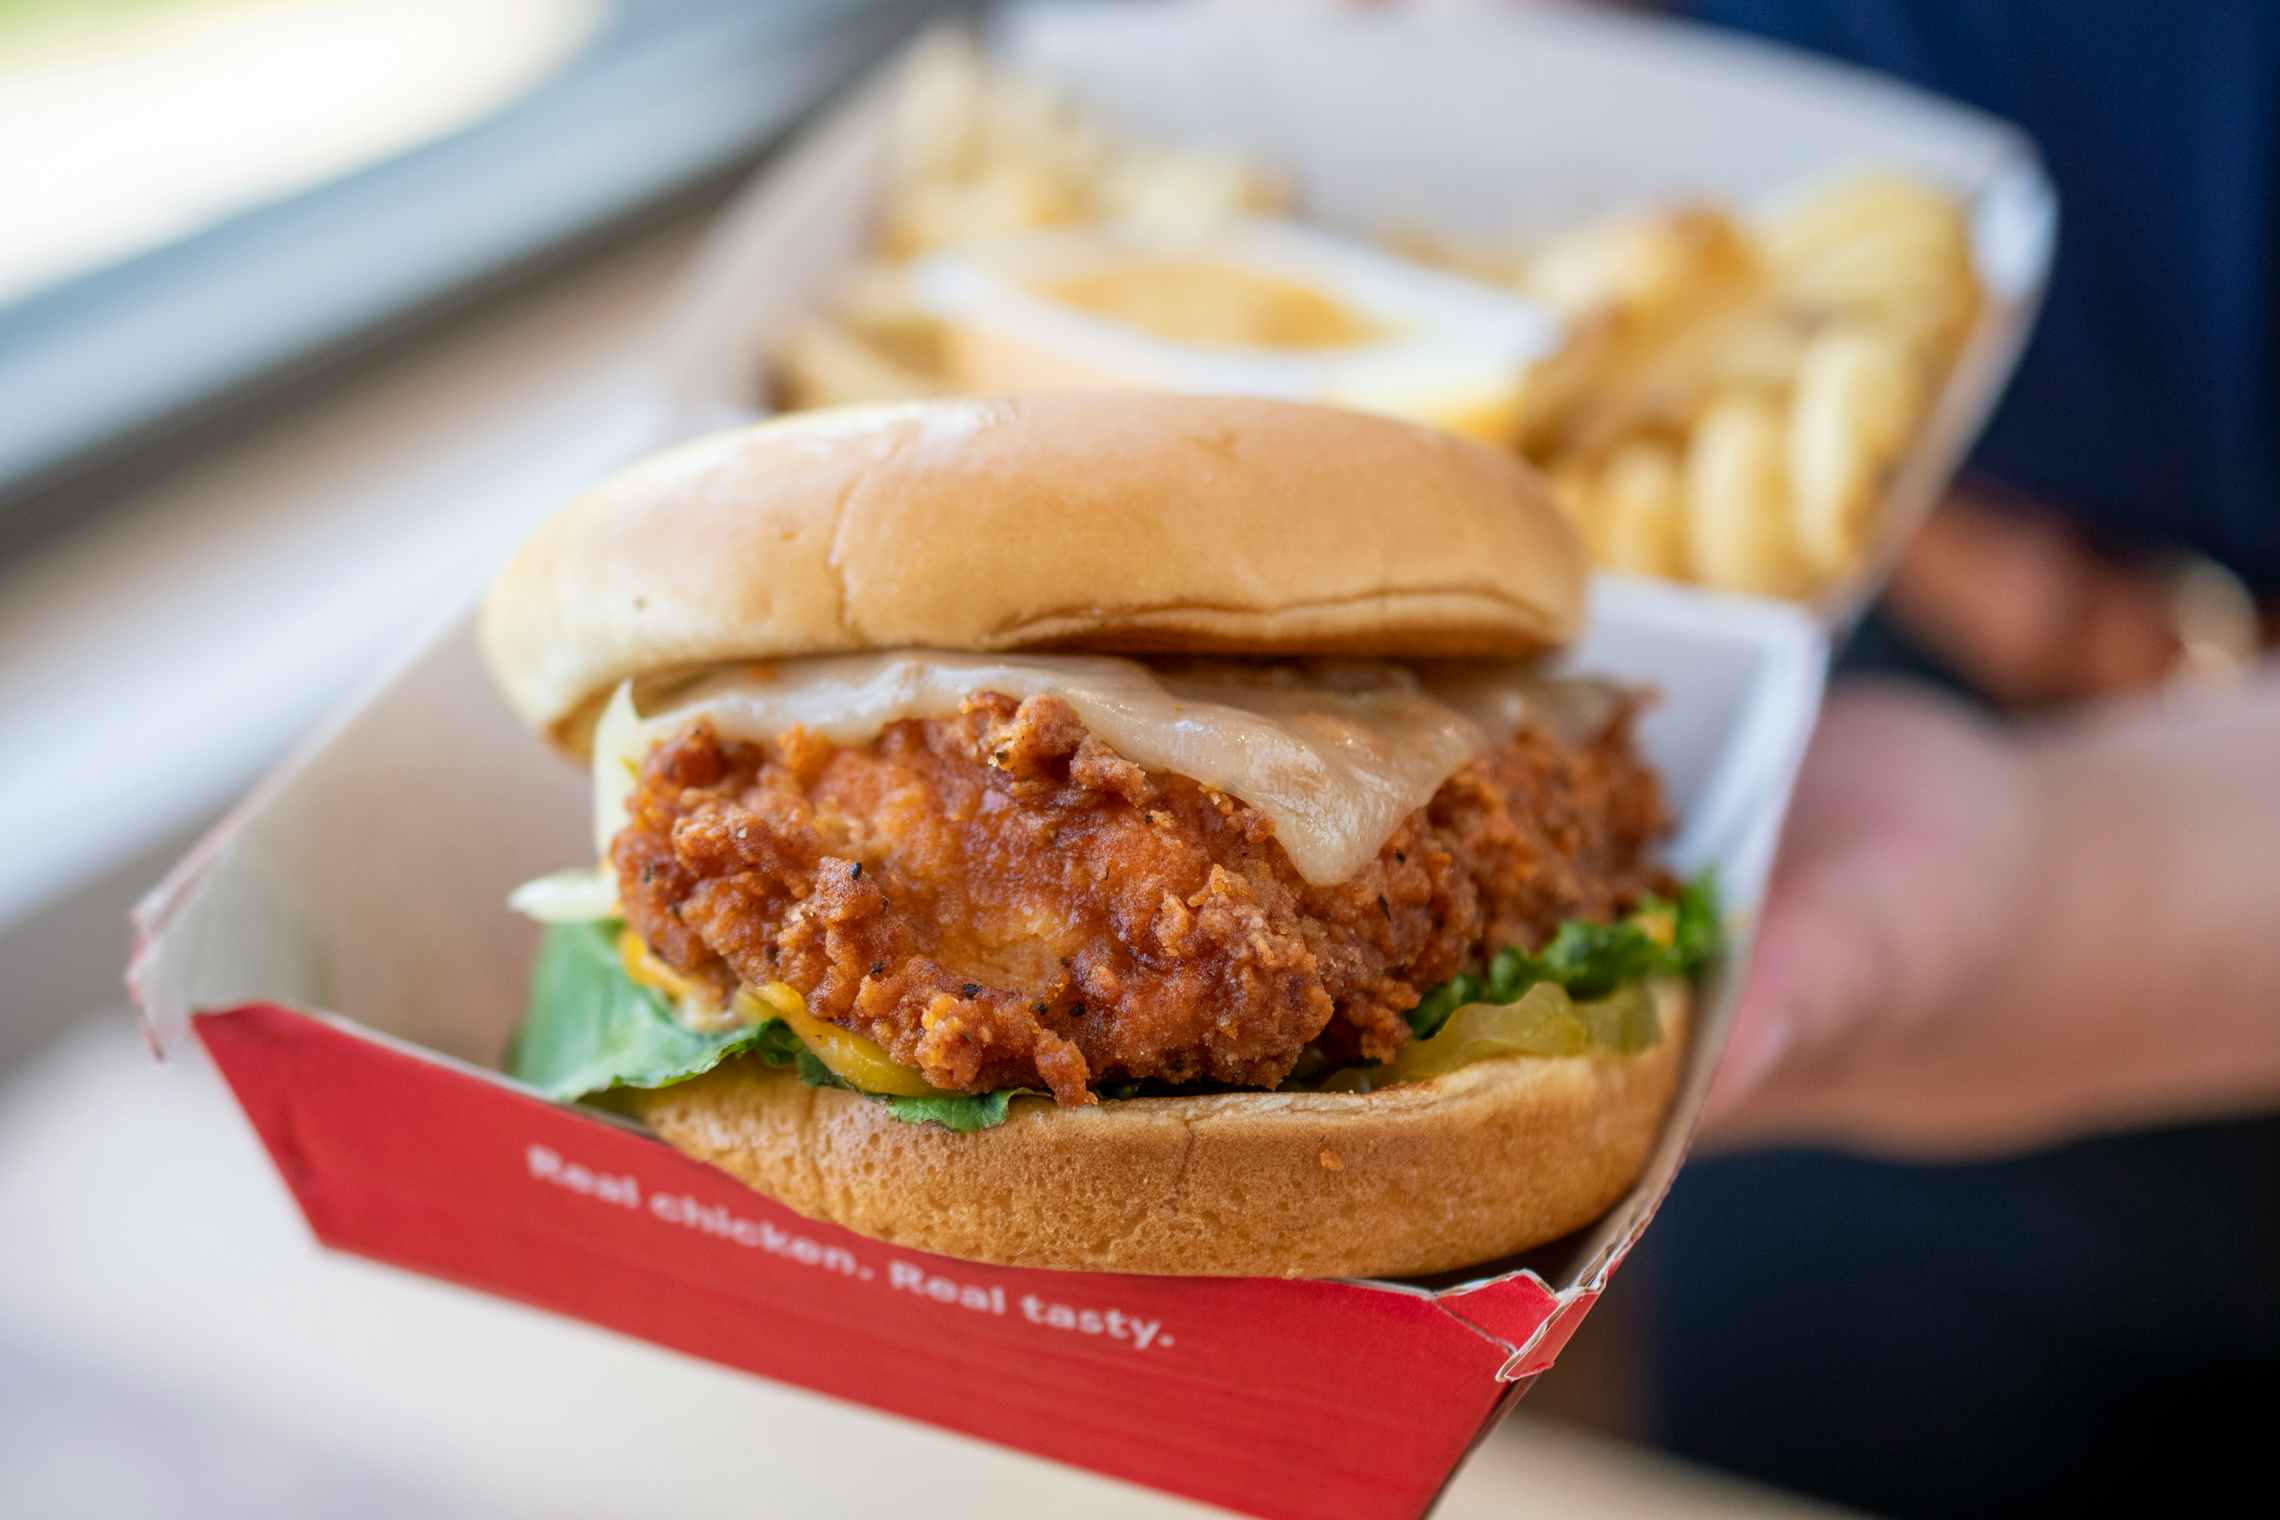 A chick-ful-a chicken sandwich and fries